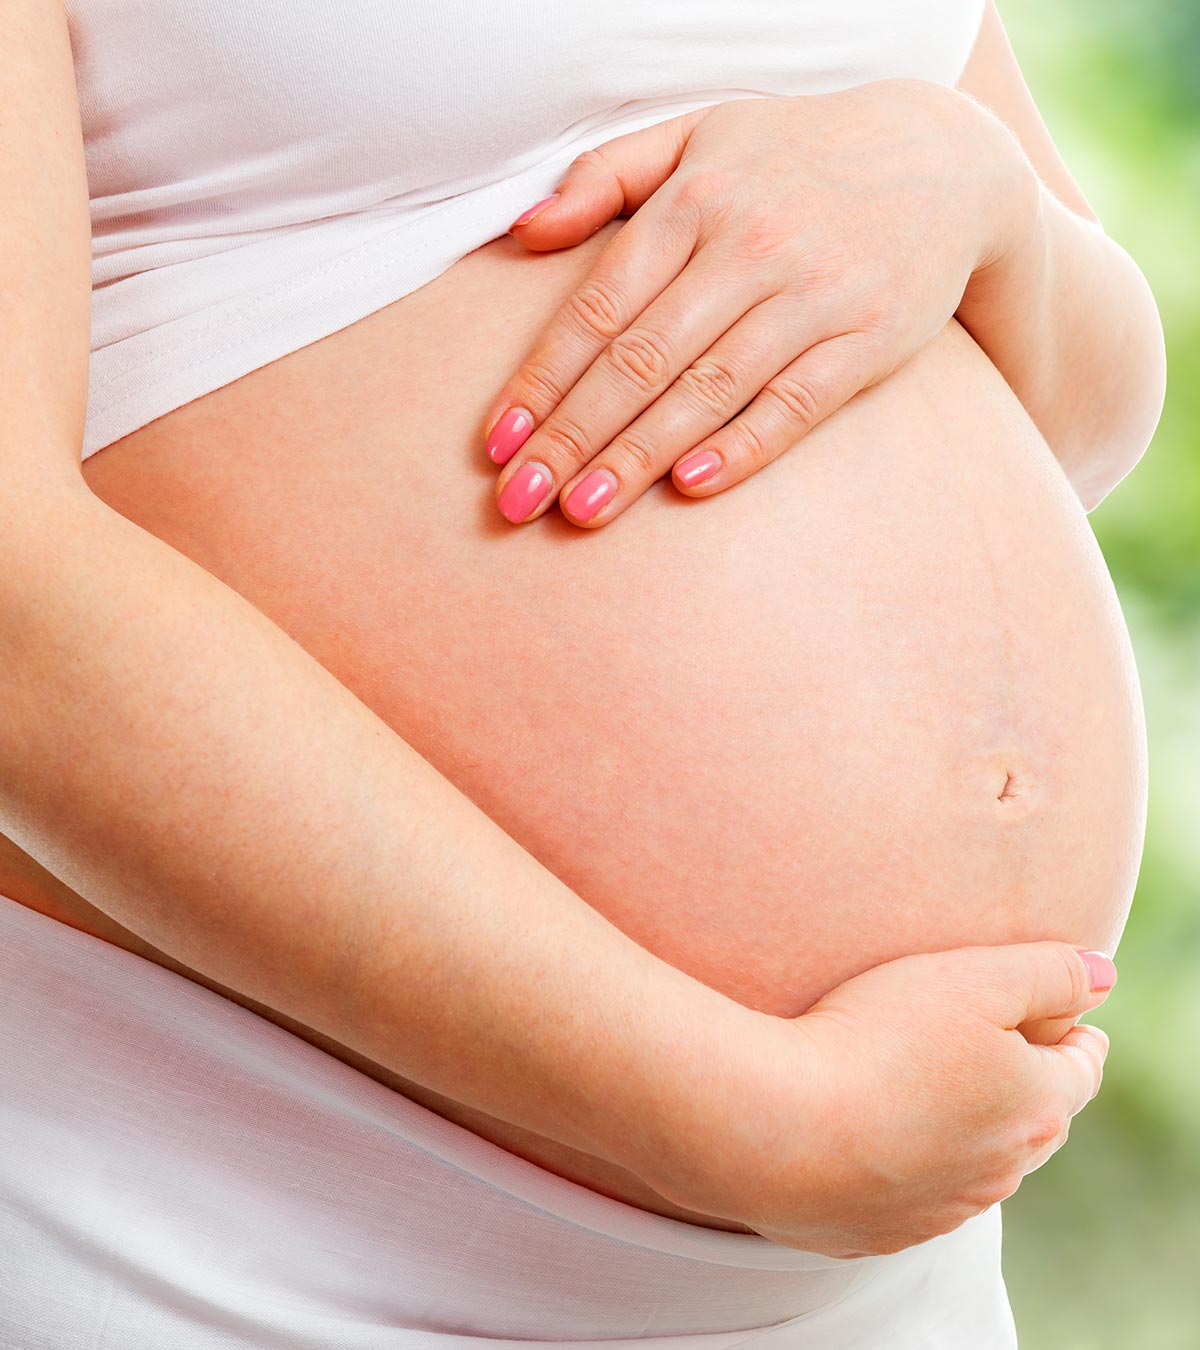 Fundal Height: A Measurement of Your Pregnant Belly Size